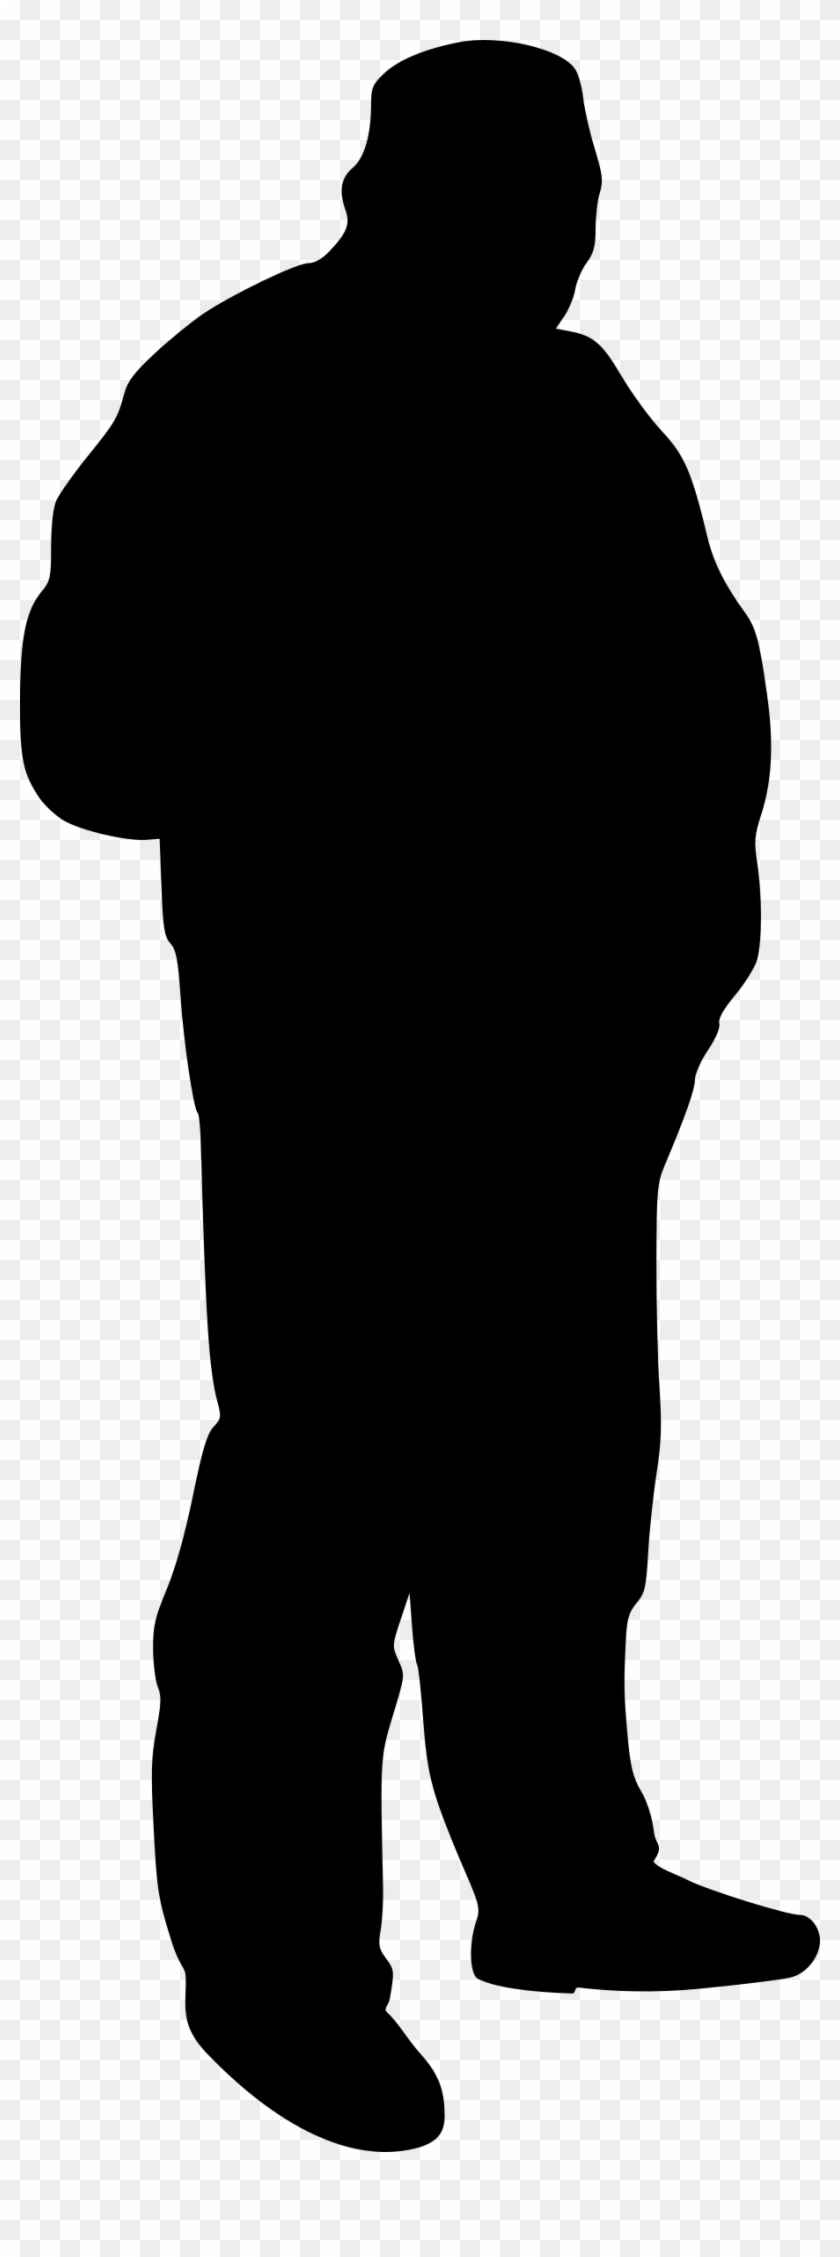 Security Silhouette - Security Guard Silhouette Png #956282